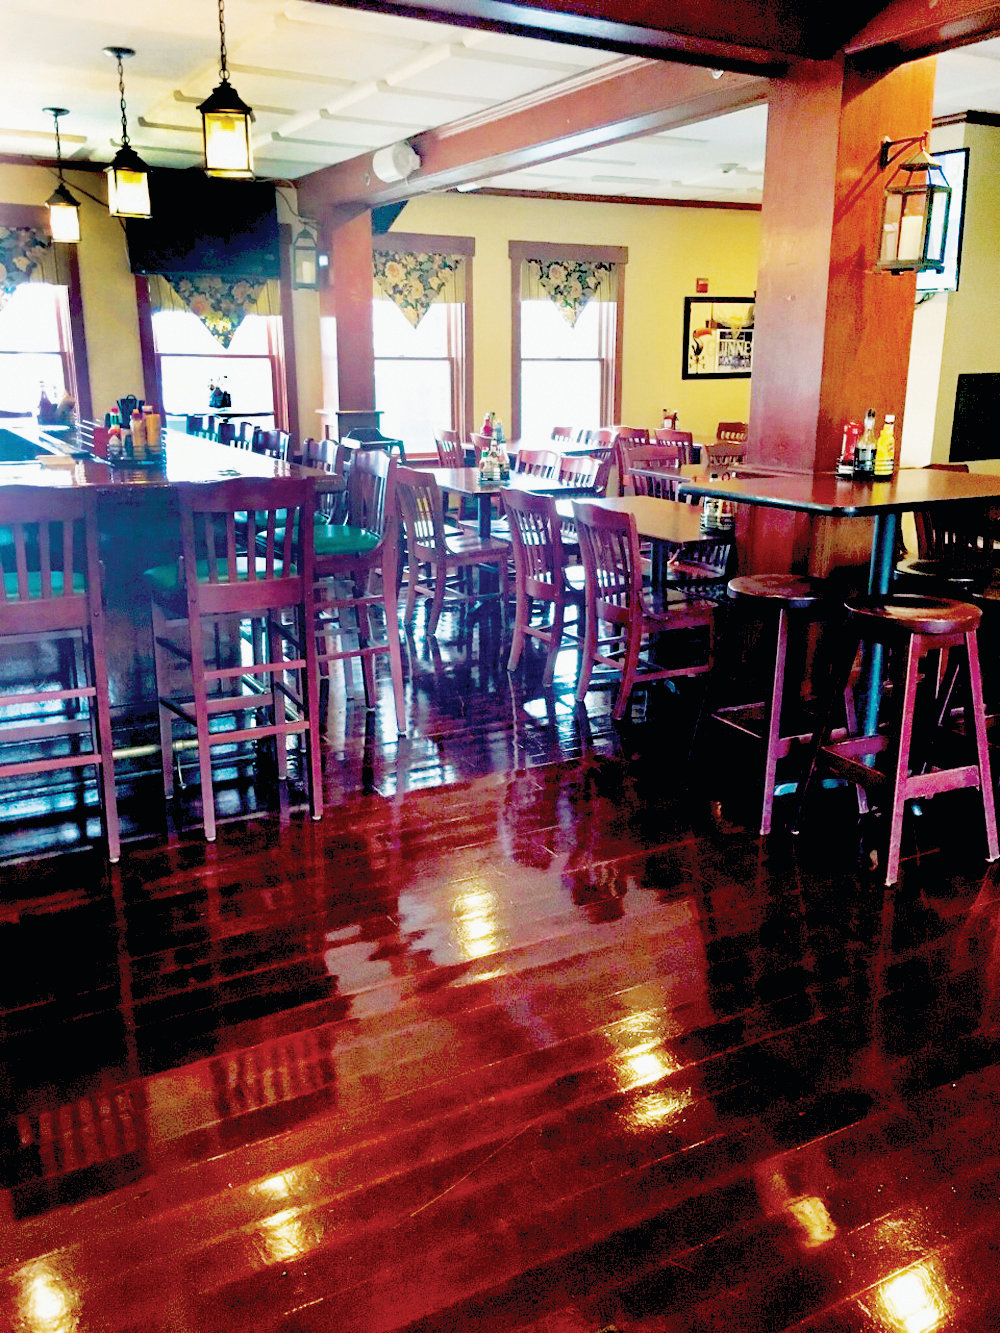 The floors are polished and ready to shine for O’Rourke’s Bar & Grill’s St. Patrick’s Day celebrations  ~ opening at 9:30am ~ with live entertainment, bag pipers & step dancers, plenty of beverages to go around and CORNED BEEF aplenty.  Join the shenanigans on March 17th!